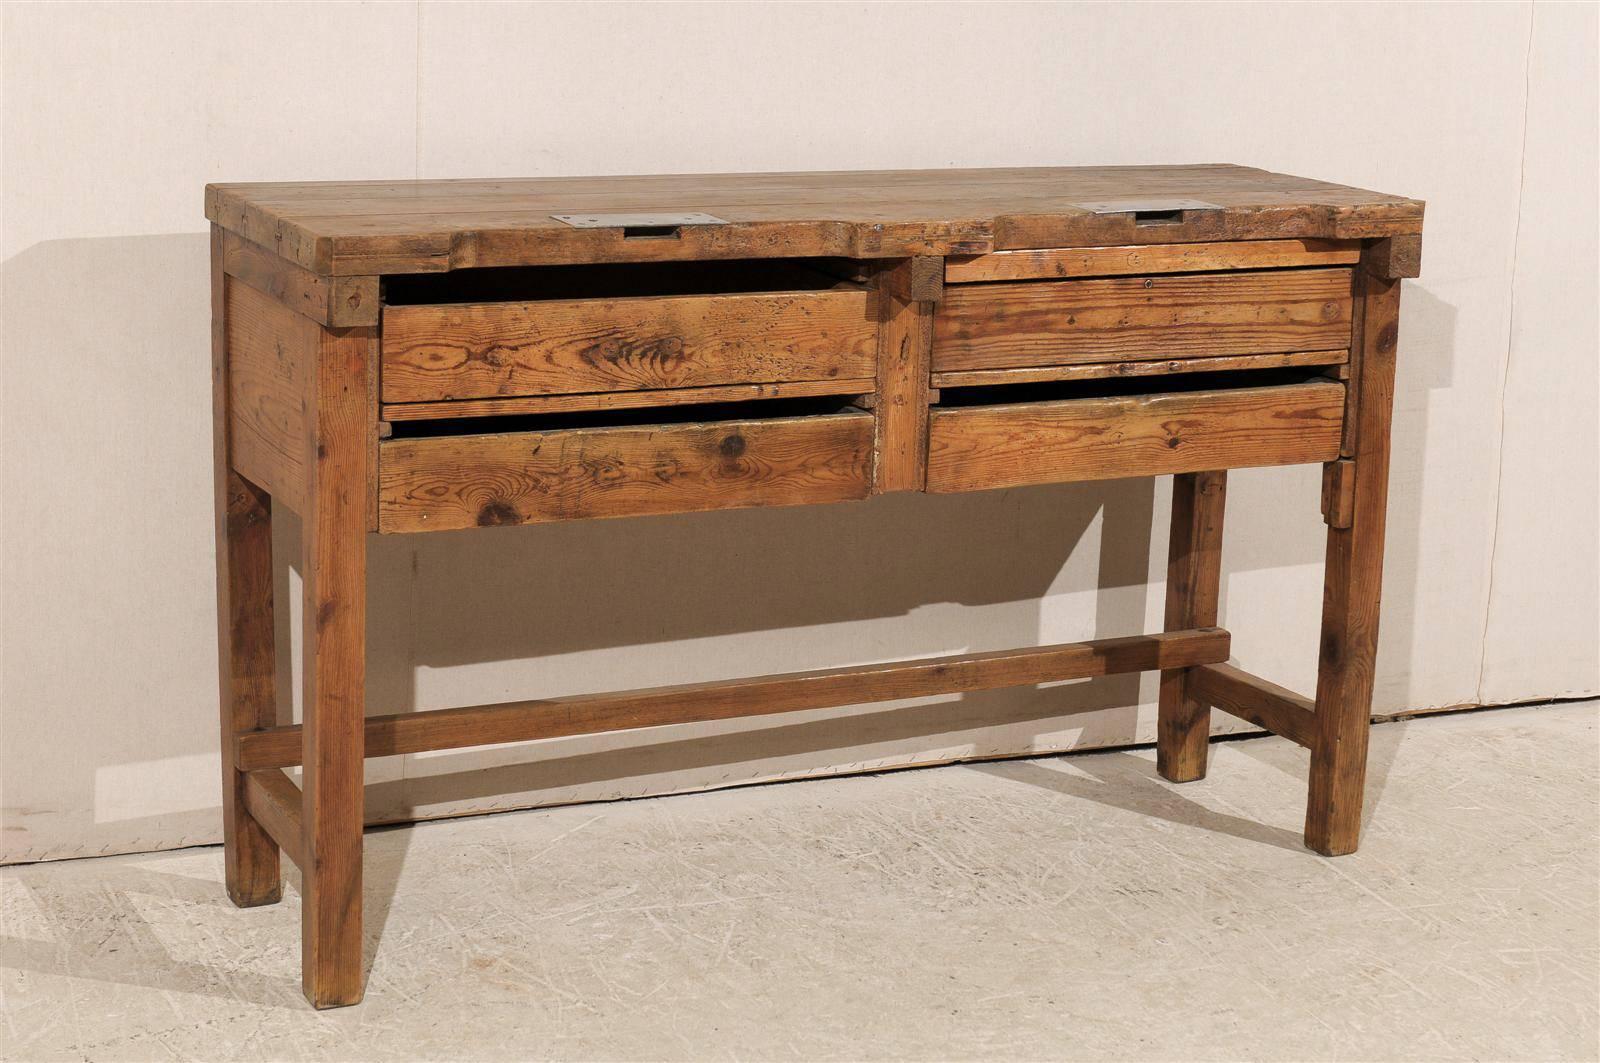 European 19th Century Jeweler's Table or Work Bench